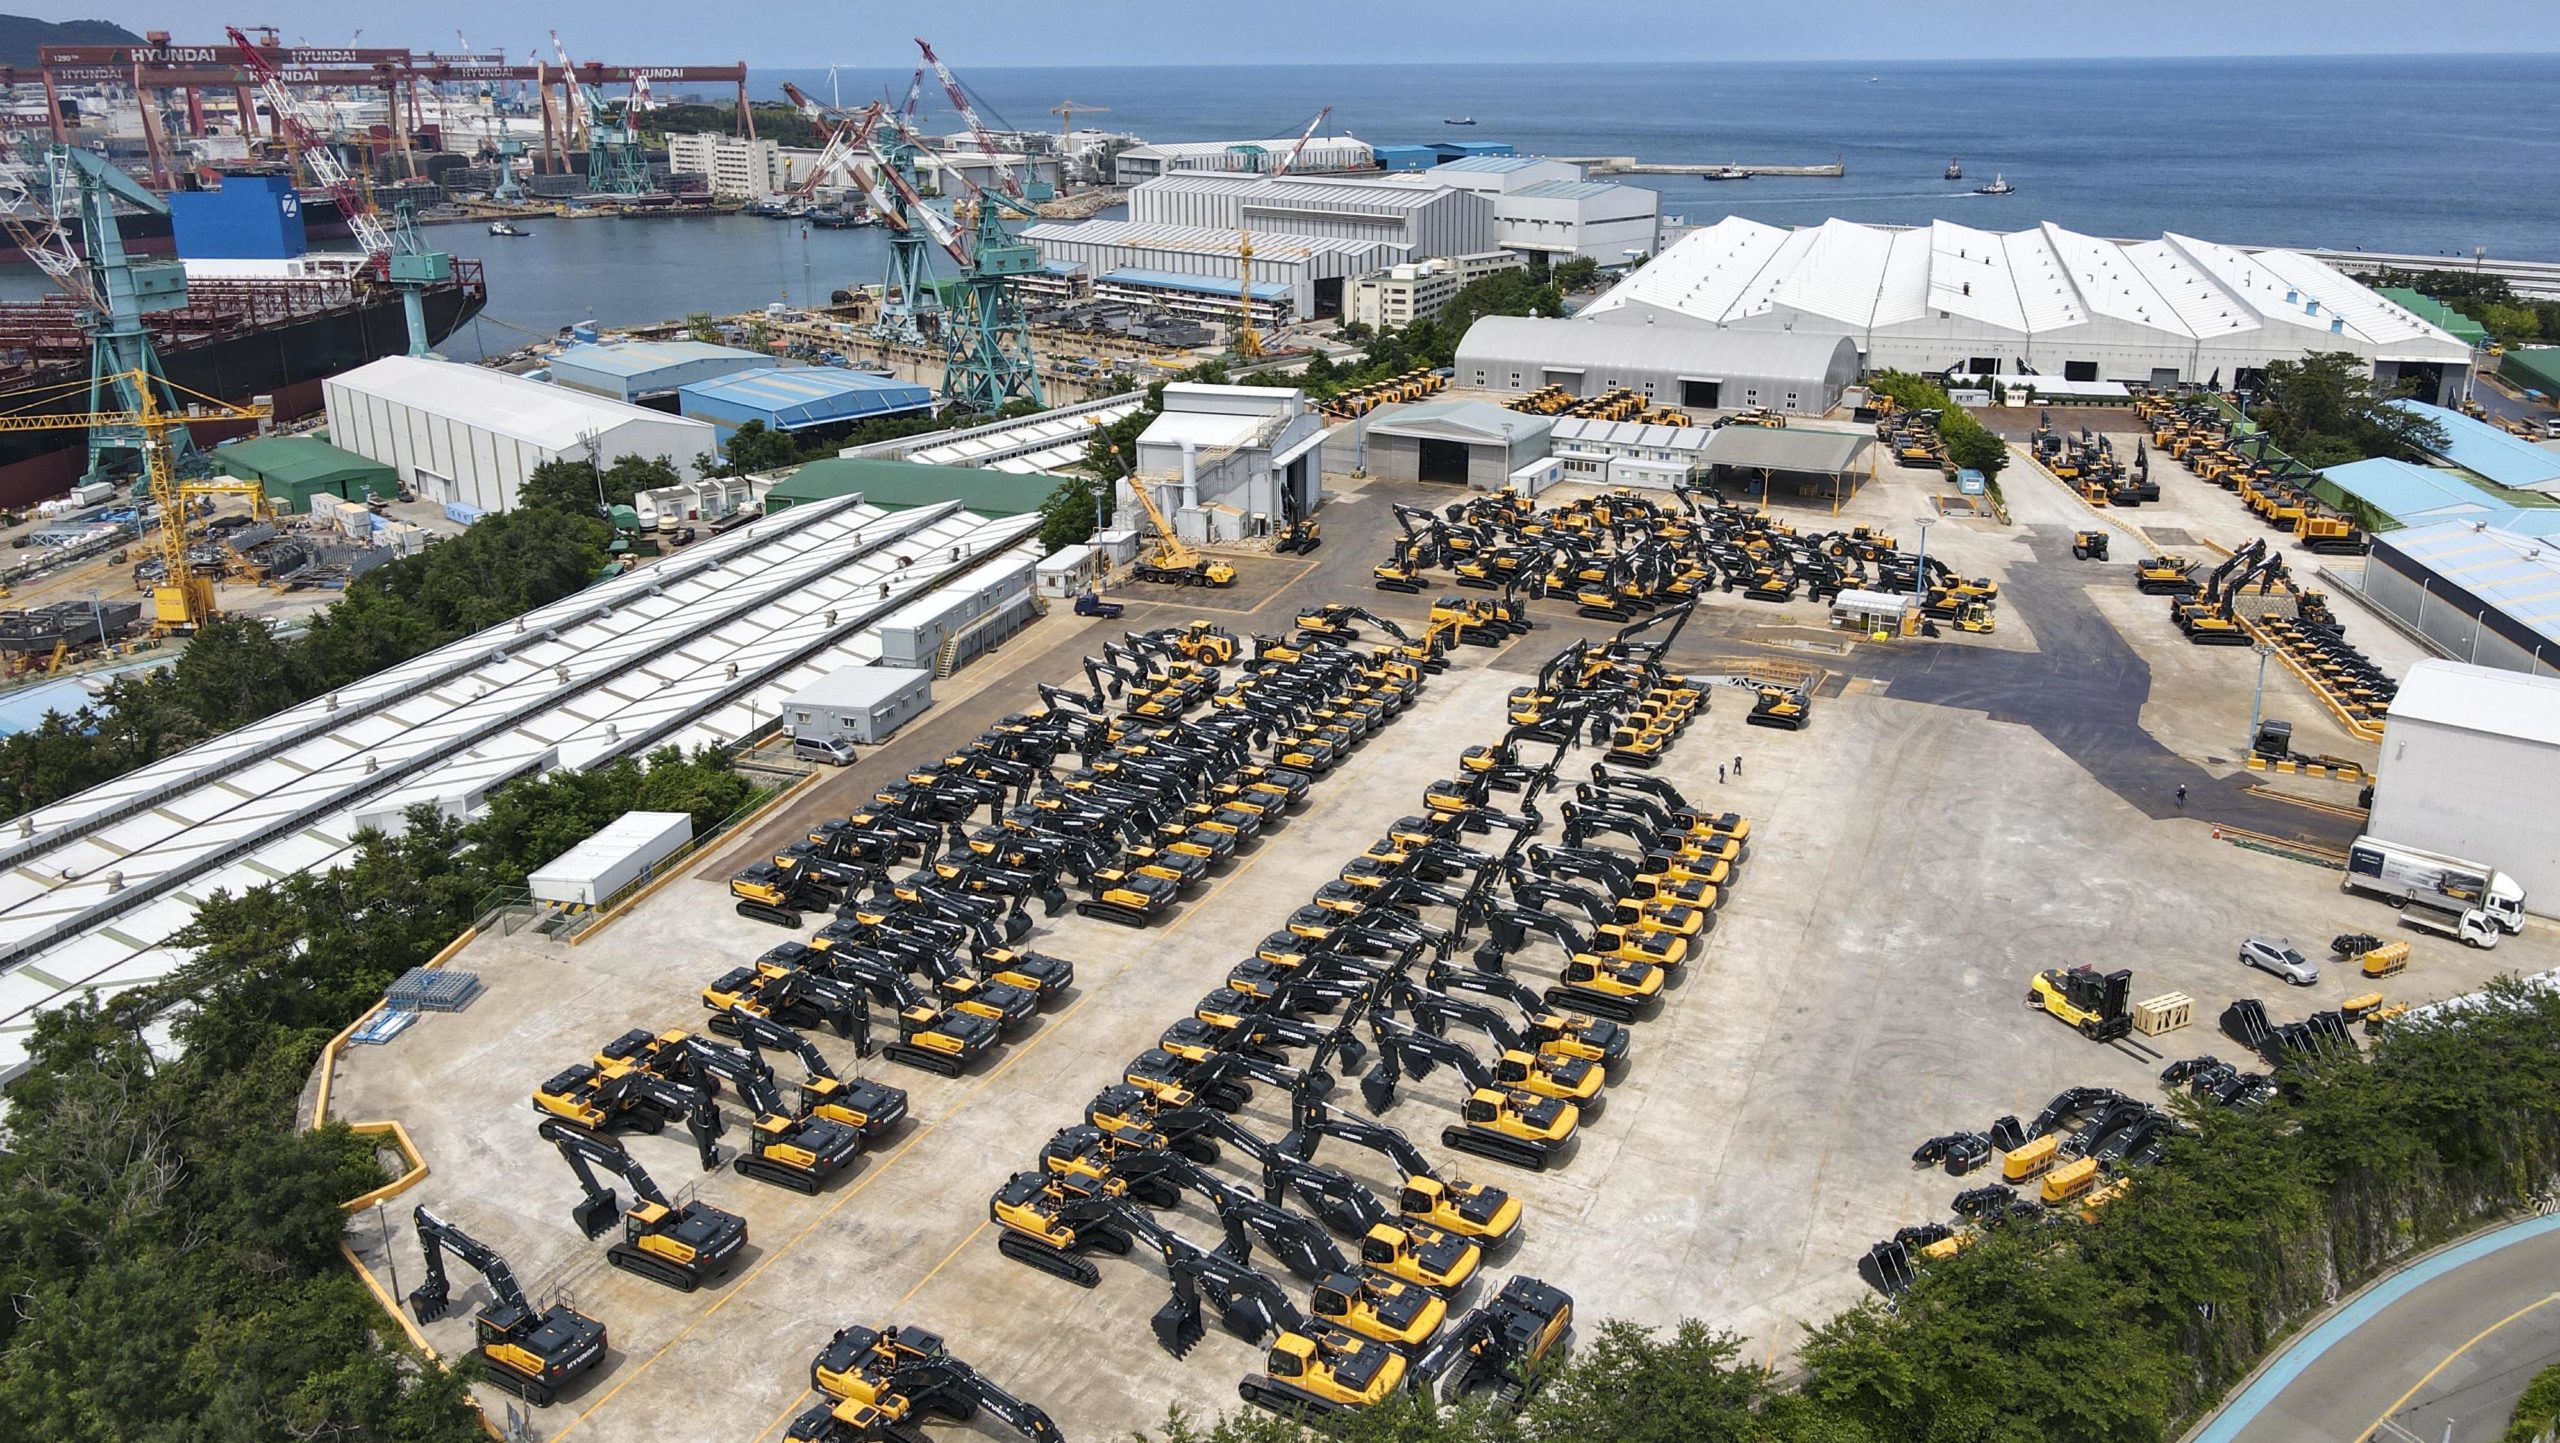 Hyundai Construction Equipment to Invest $170 Million to Expand Production Capacity by 50%